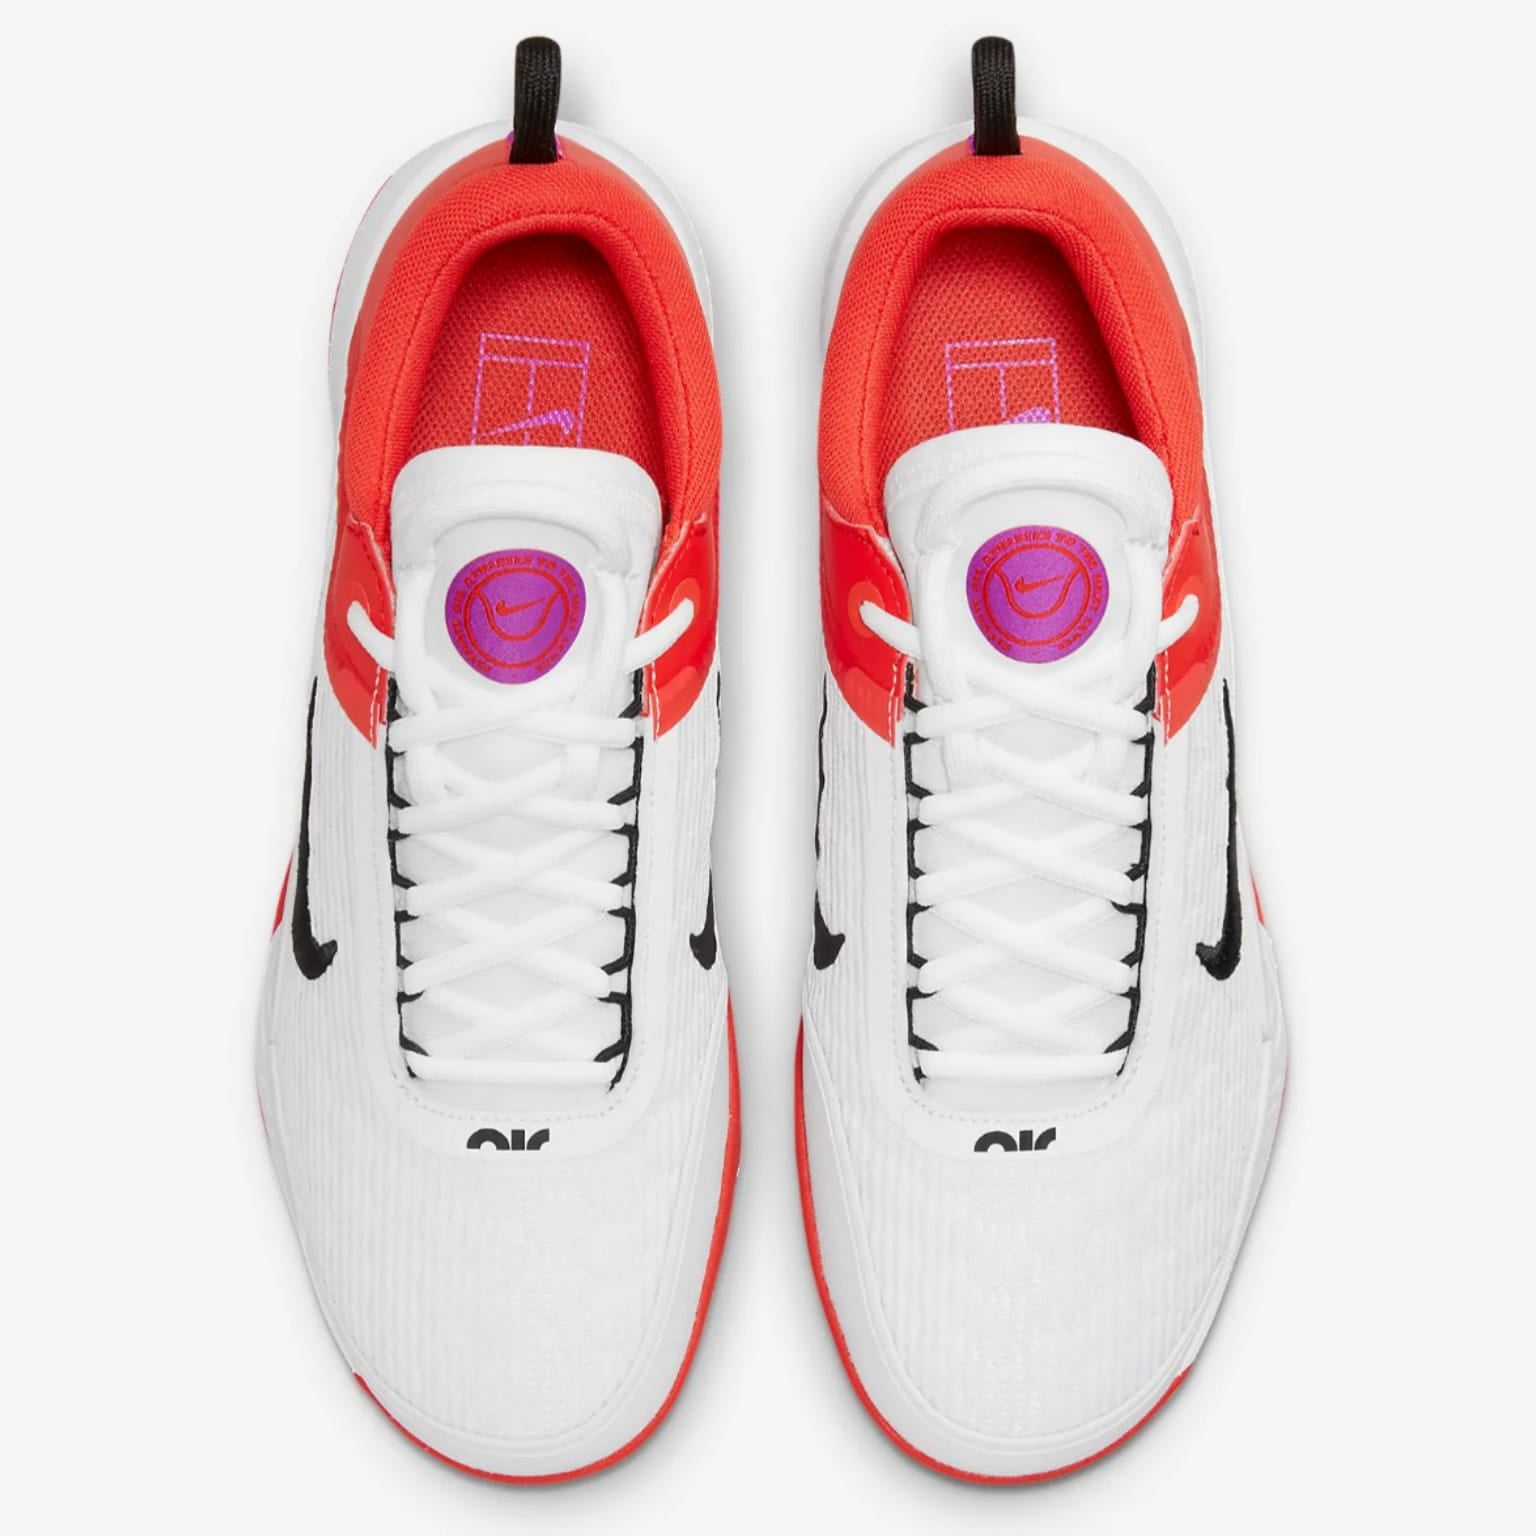 Tenis NikeCourt Air Zoom NXT Caballero (White/Black/Picante Red)